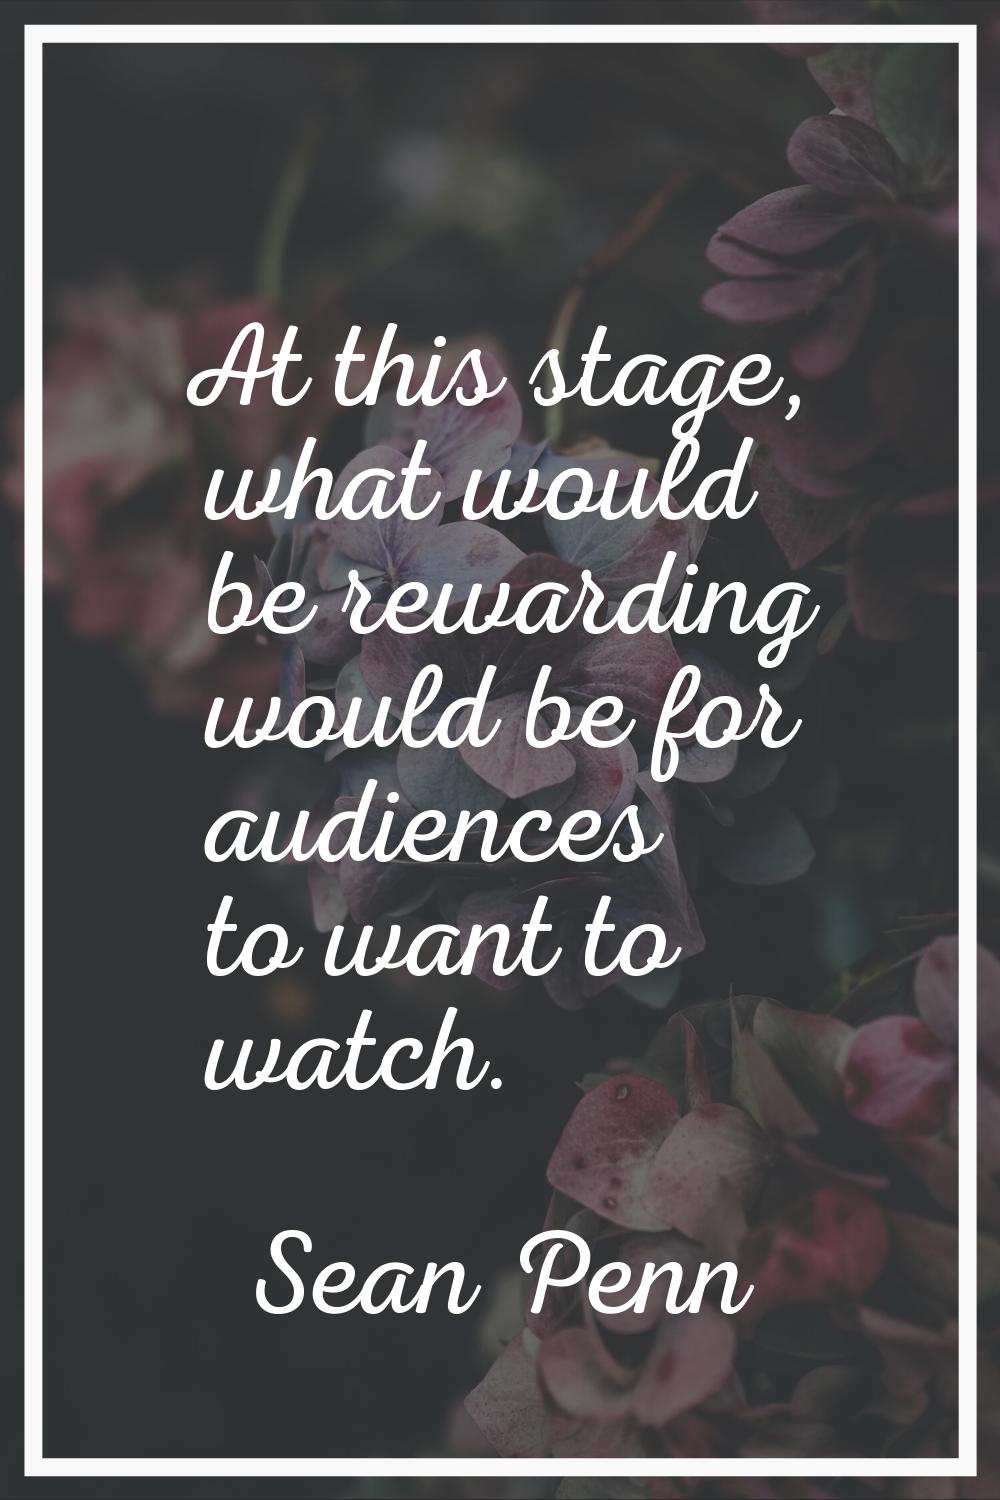 At this stage, what would be rewarding would be for audiences to want to watch.